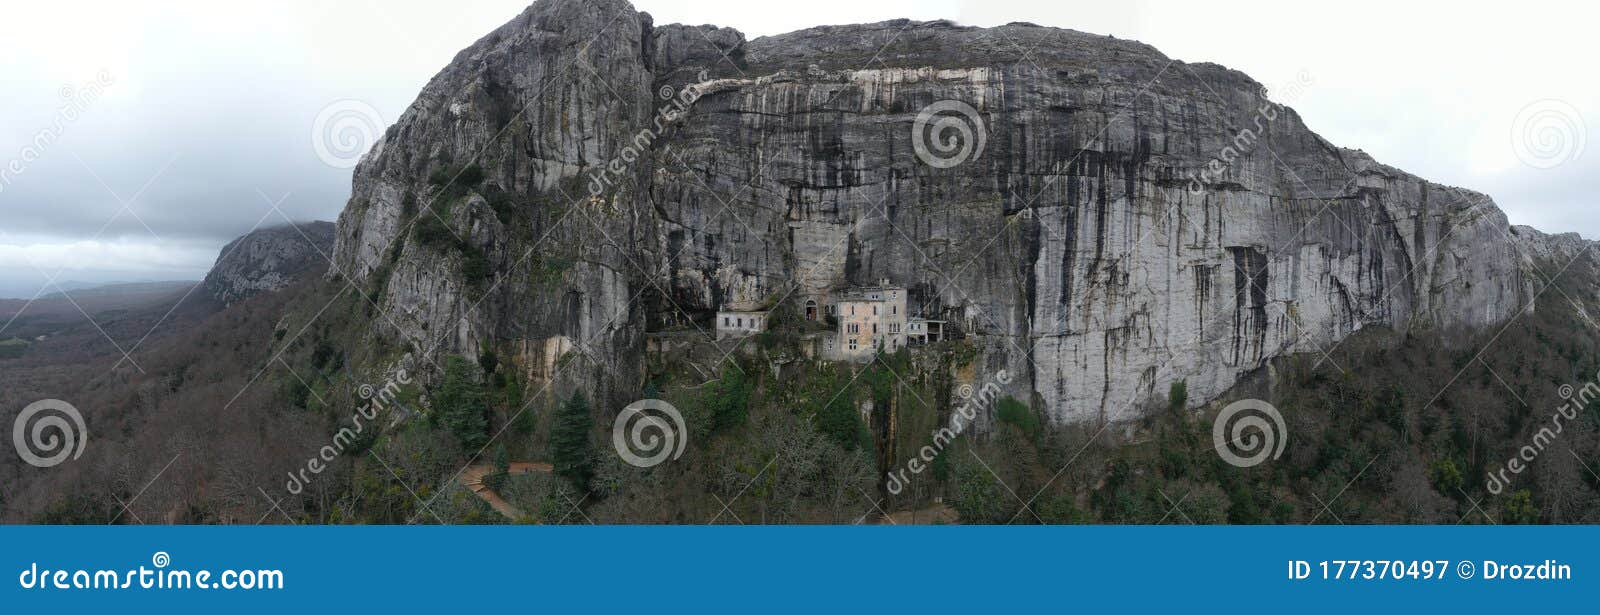 aerial view of the grotto of maria magdalena in france, plan d`aups, the massif st.baum, holy fragrance, famous place